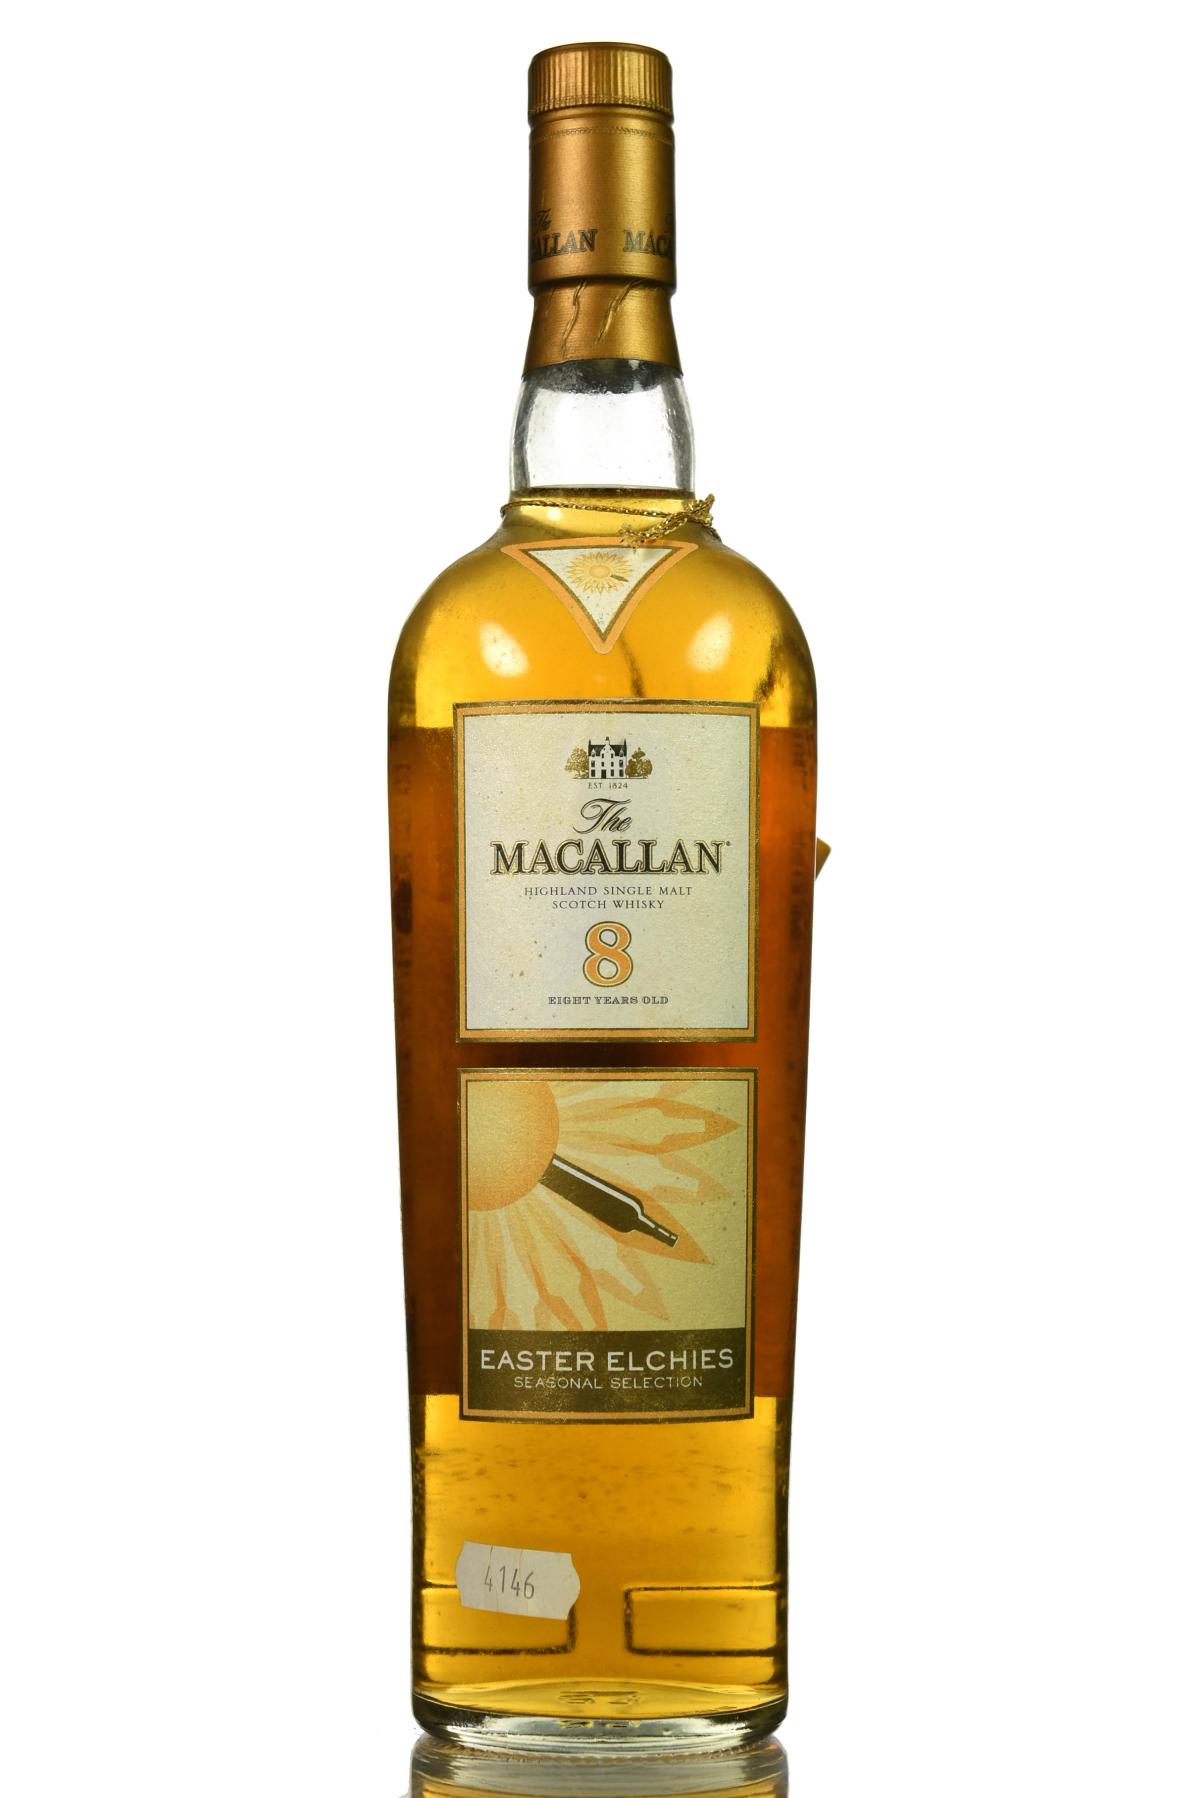 Macallan 8 Year Old - Easter Elchies